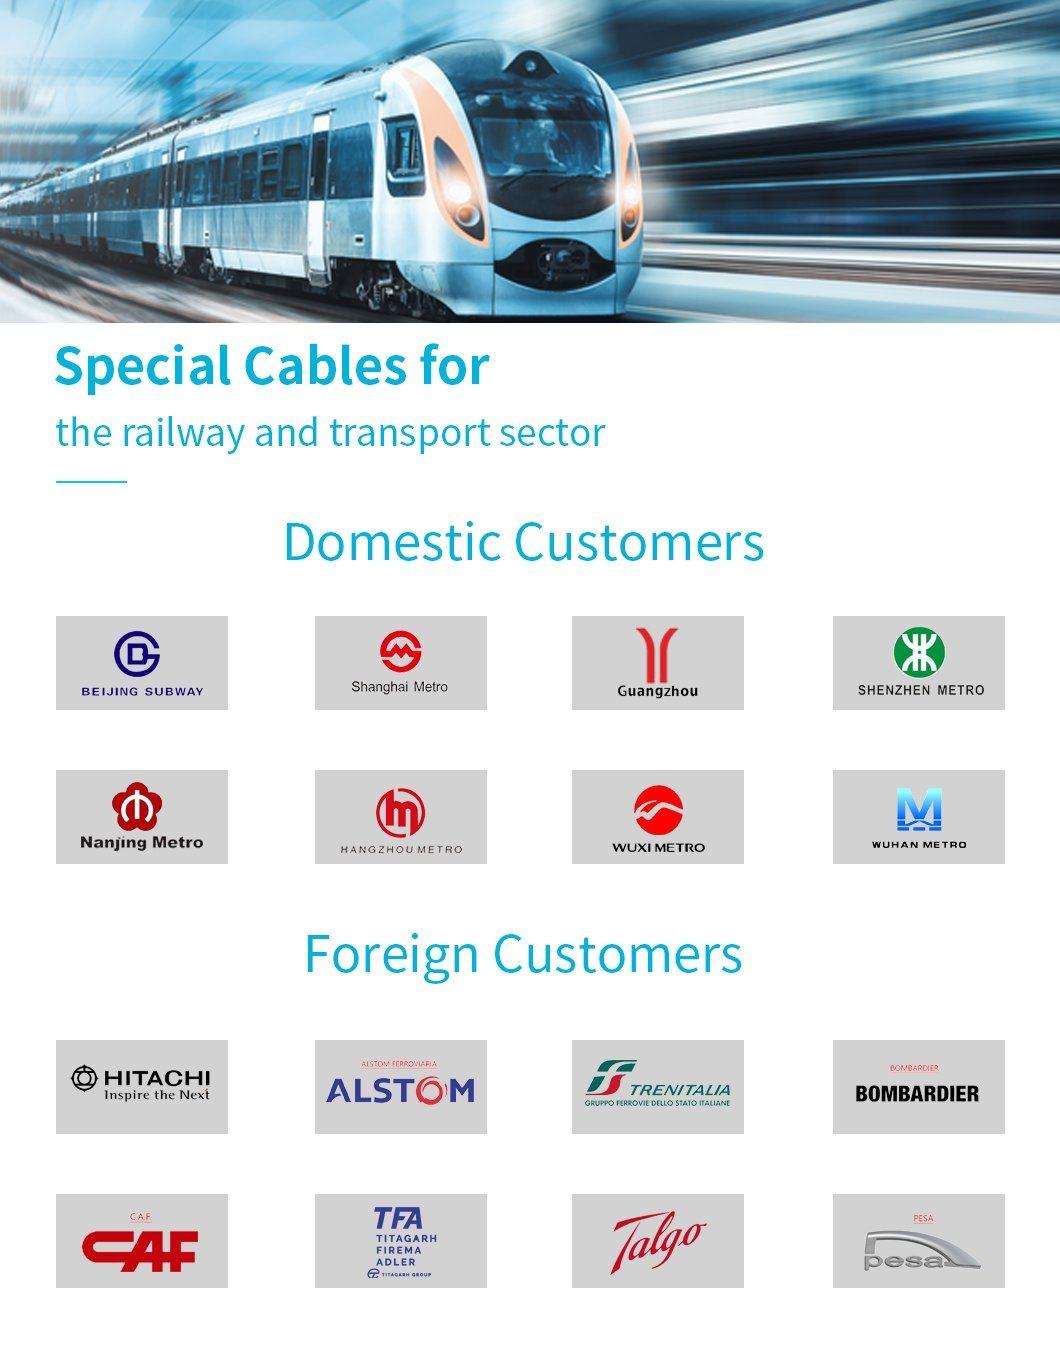 Customized Power Cable of High Speed Data Transmission for High-Speed Rail